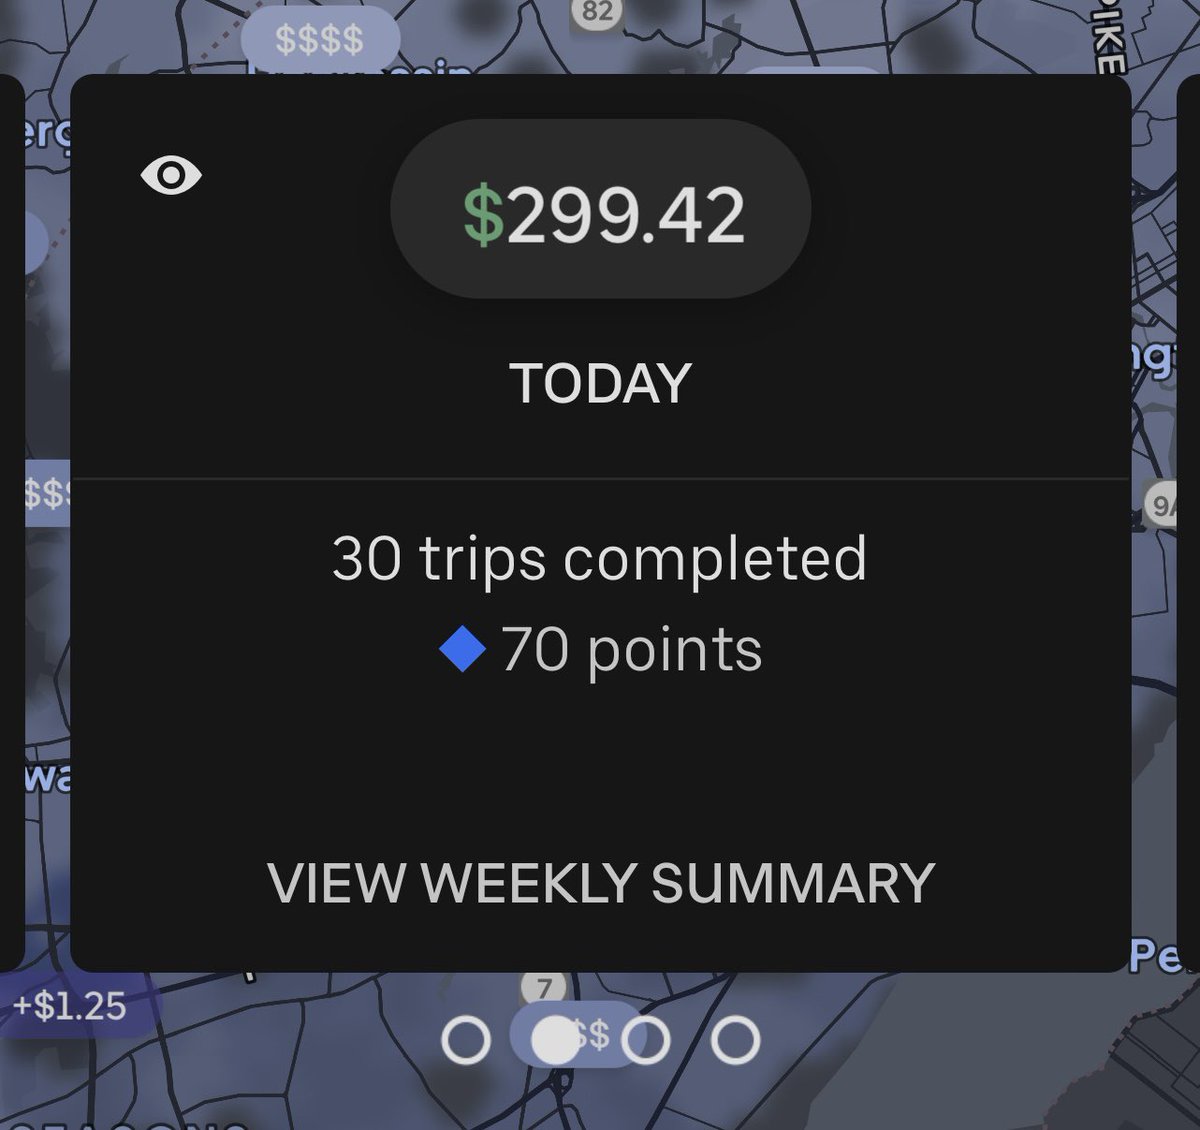 Tail of two drastically different Saturday outcomes. #Uber #weekendwarrior